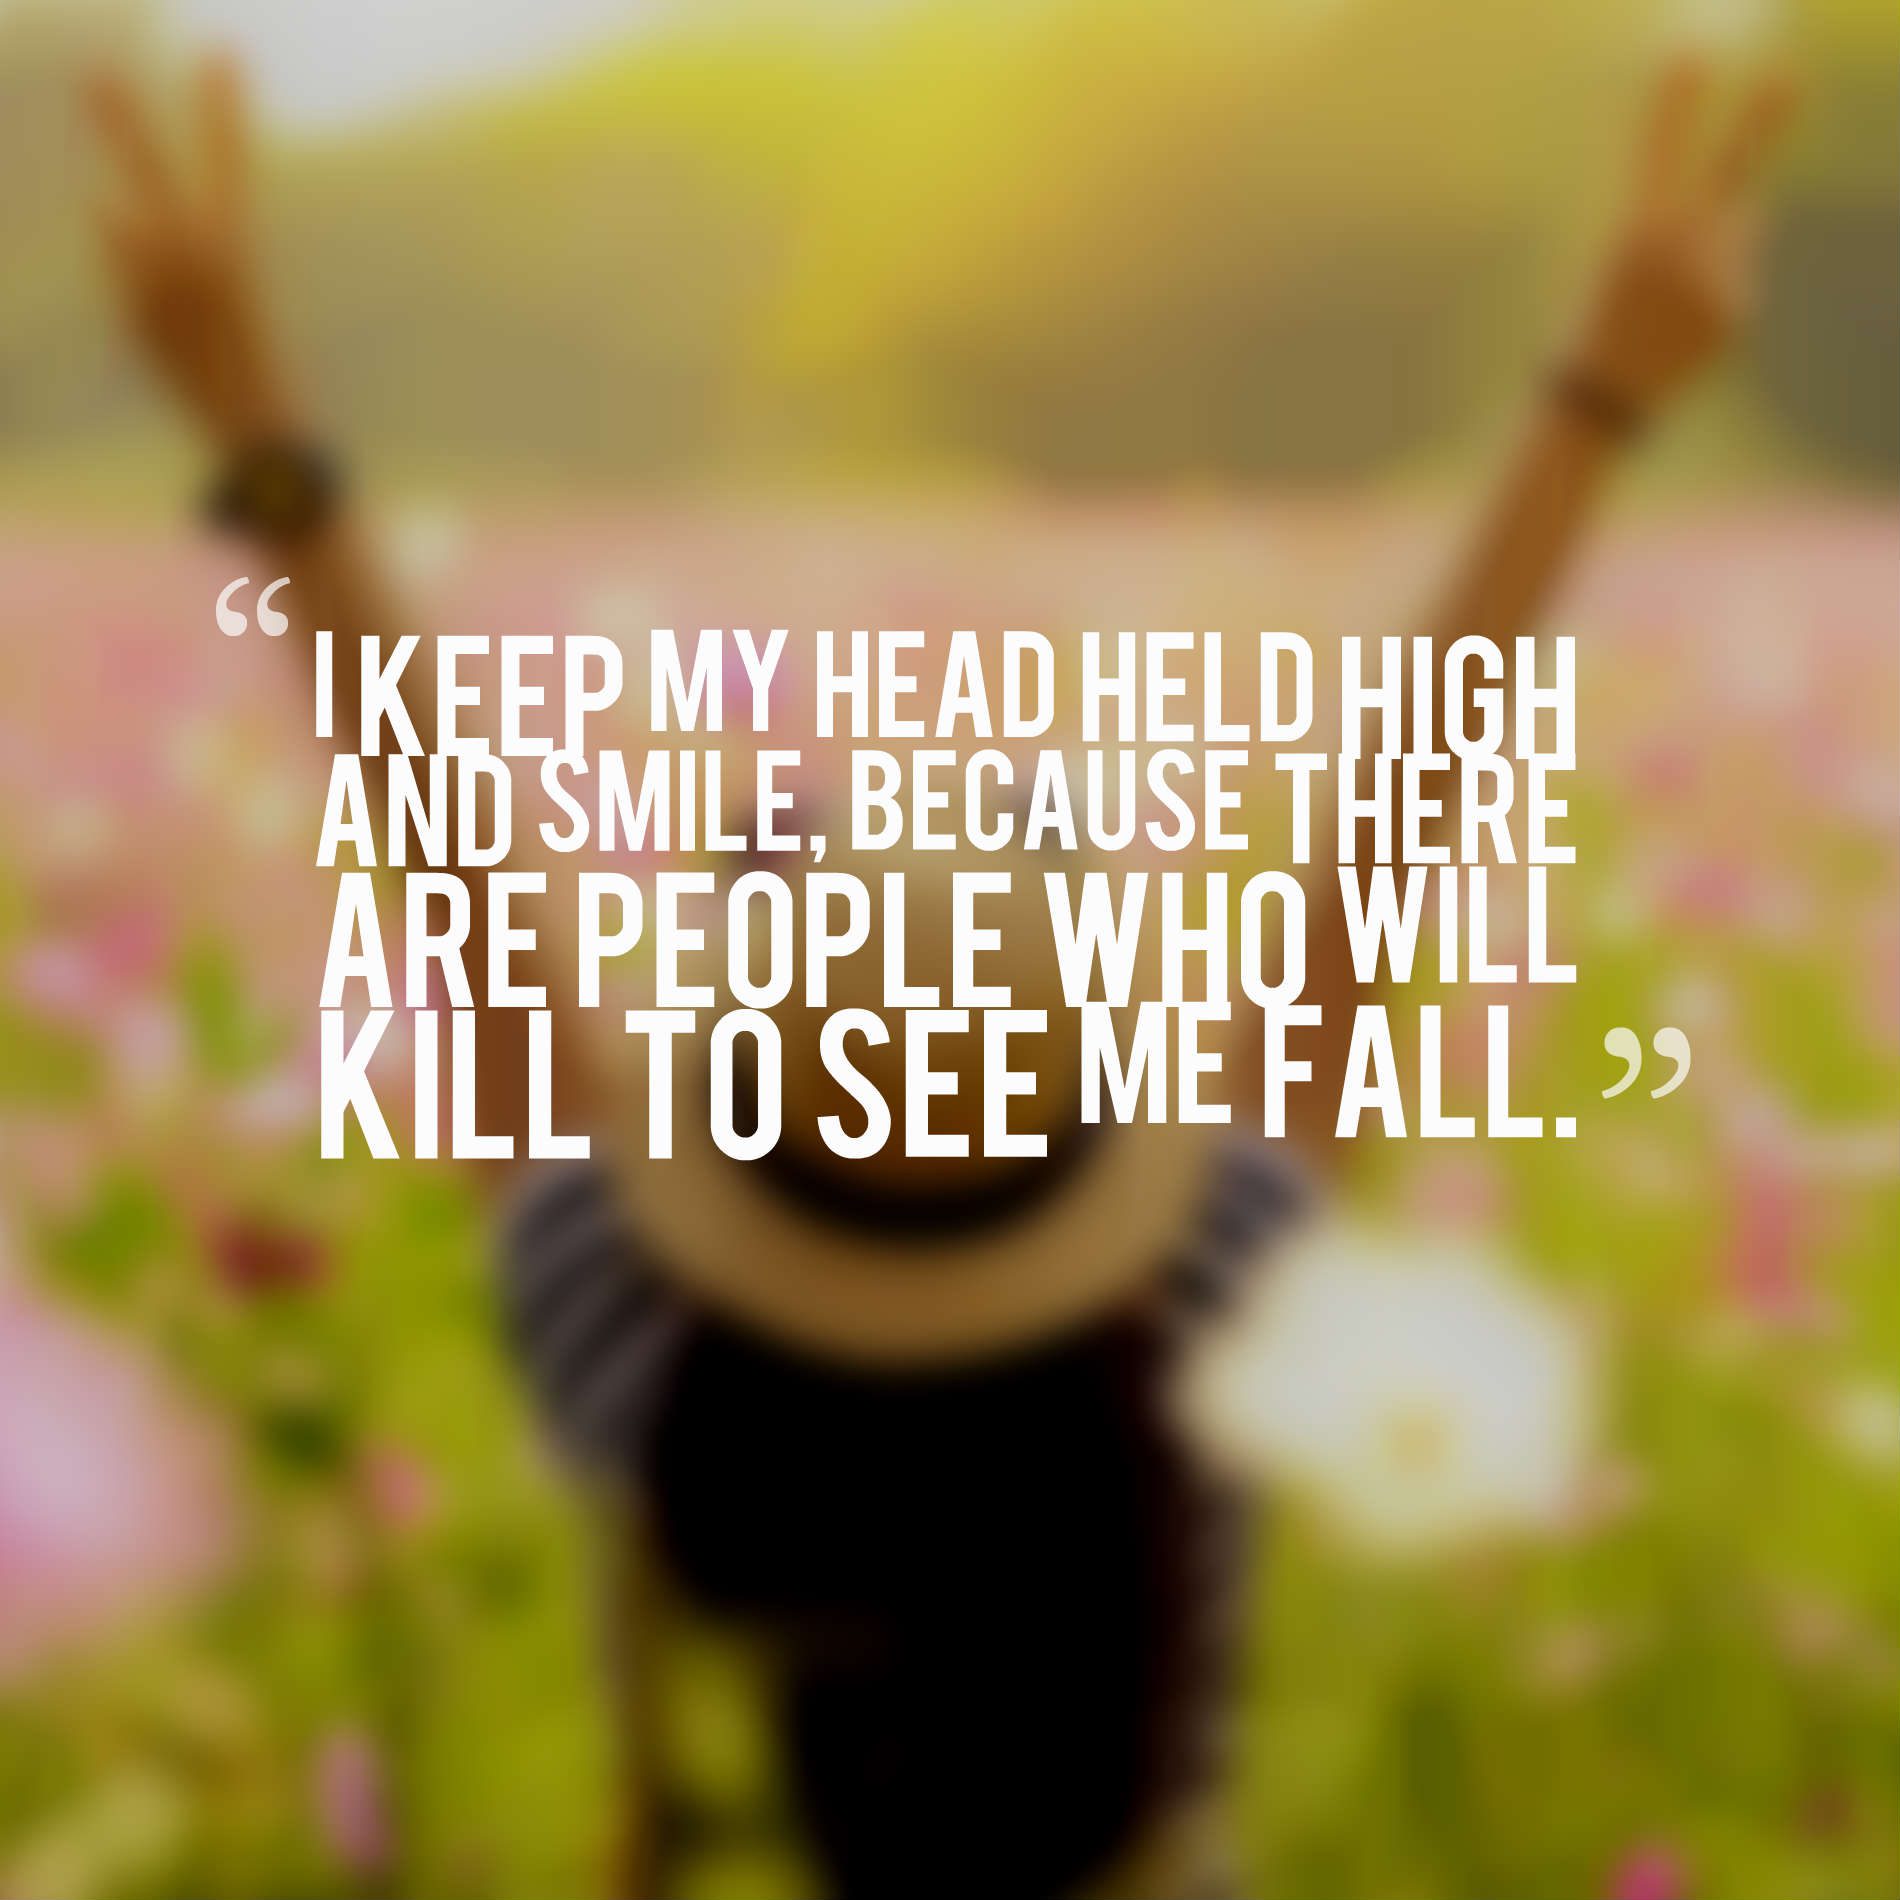 I keep my head held high and smile, because there are people who will kill to see me fall.